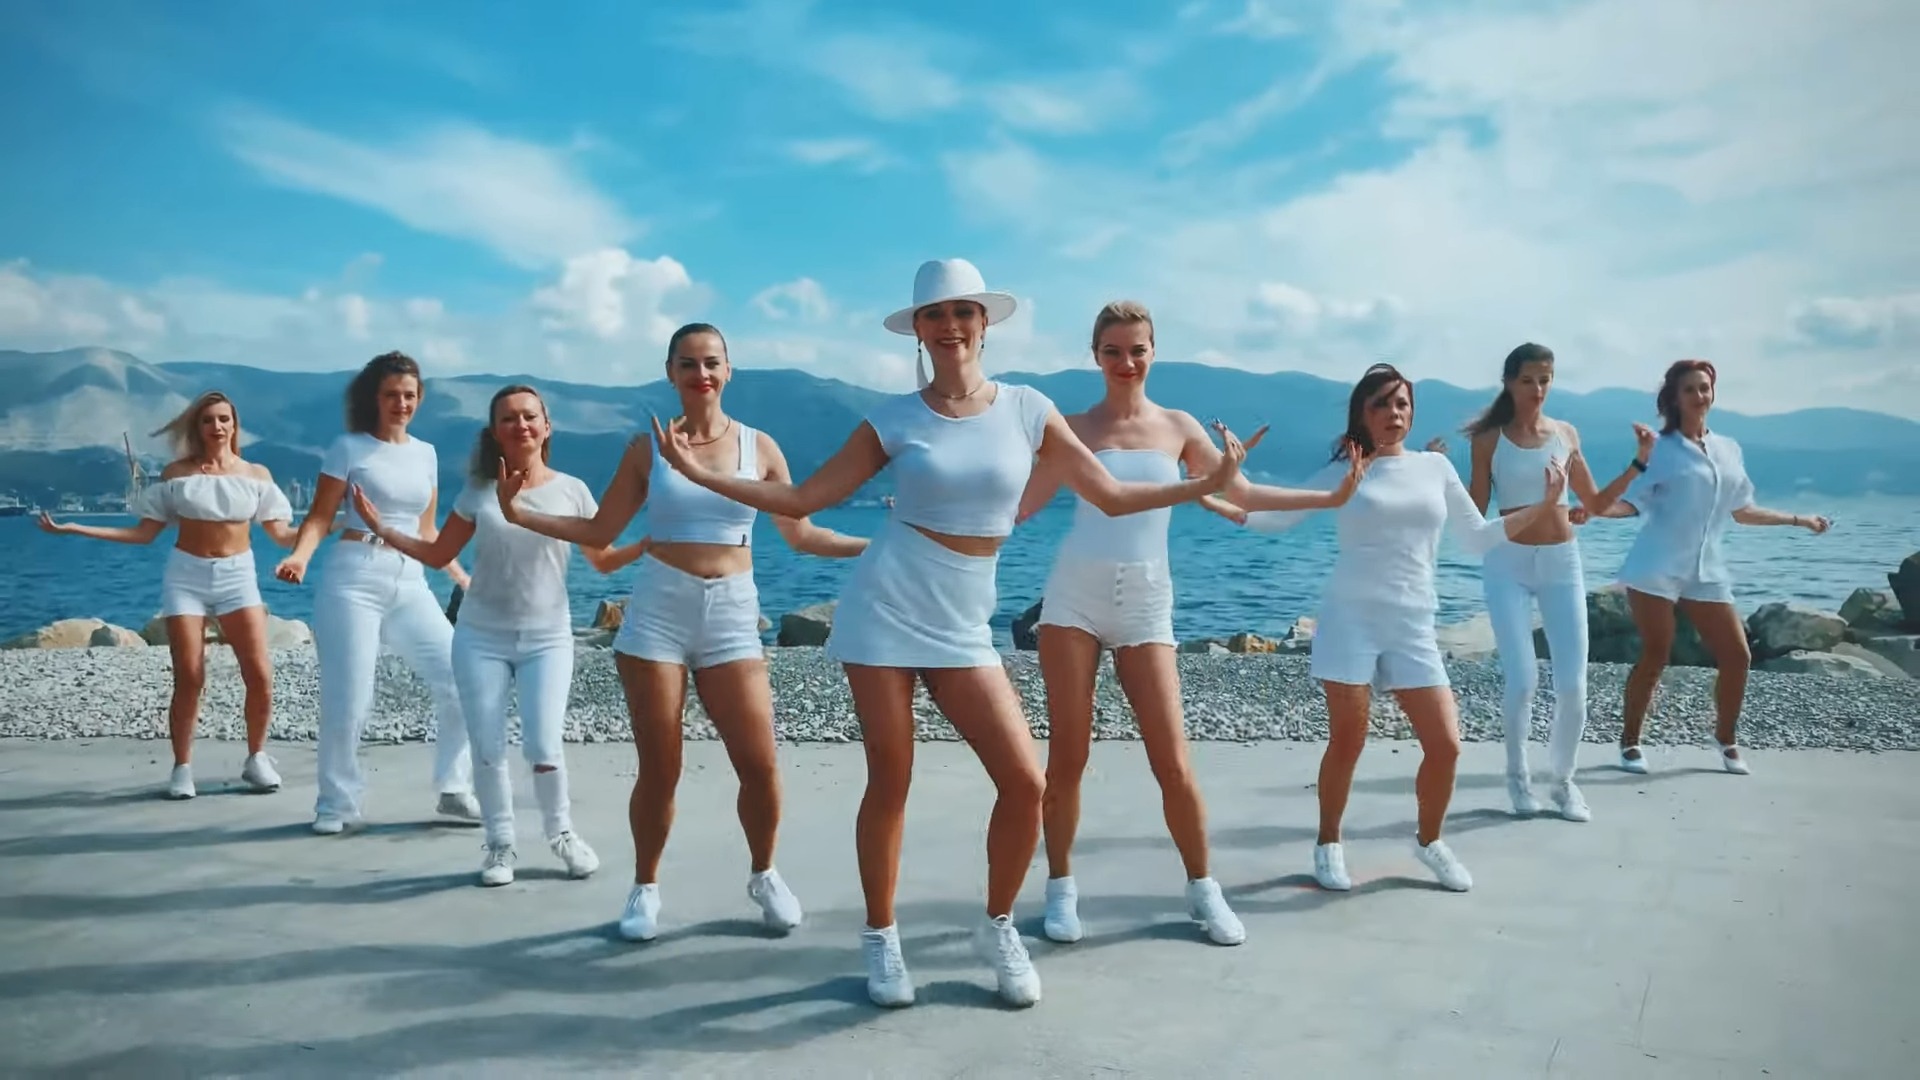 Women in white smiling and dancing bachata near the sea and mountains in the background